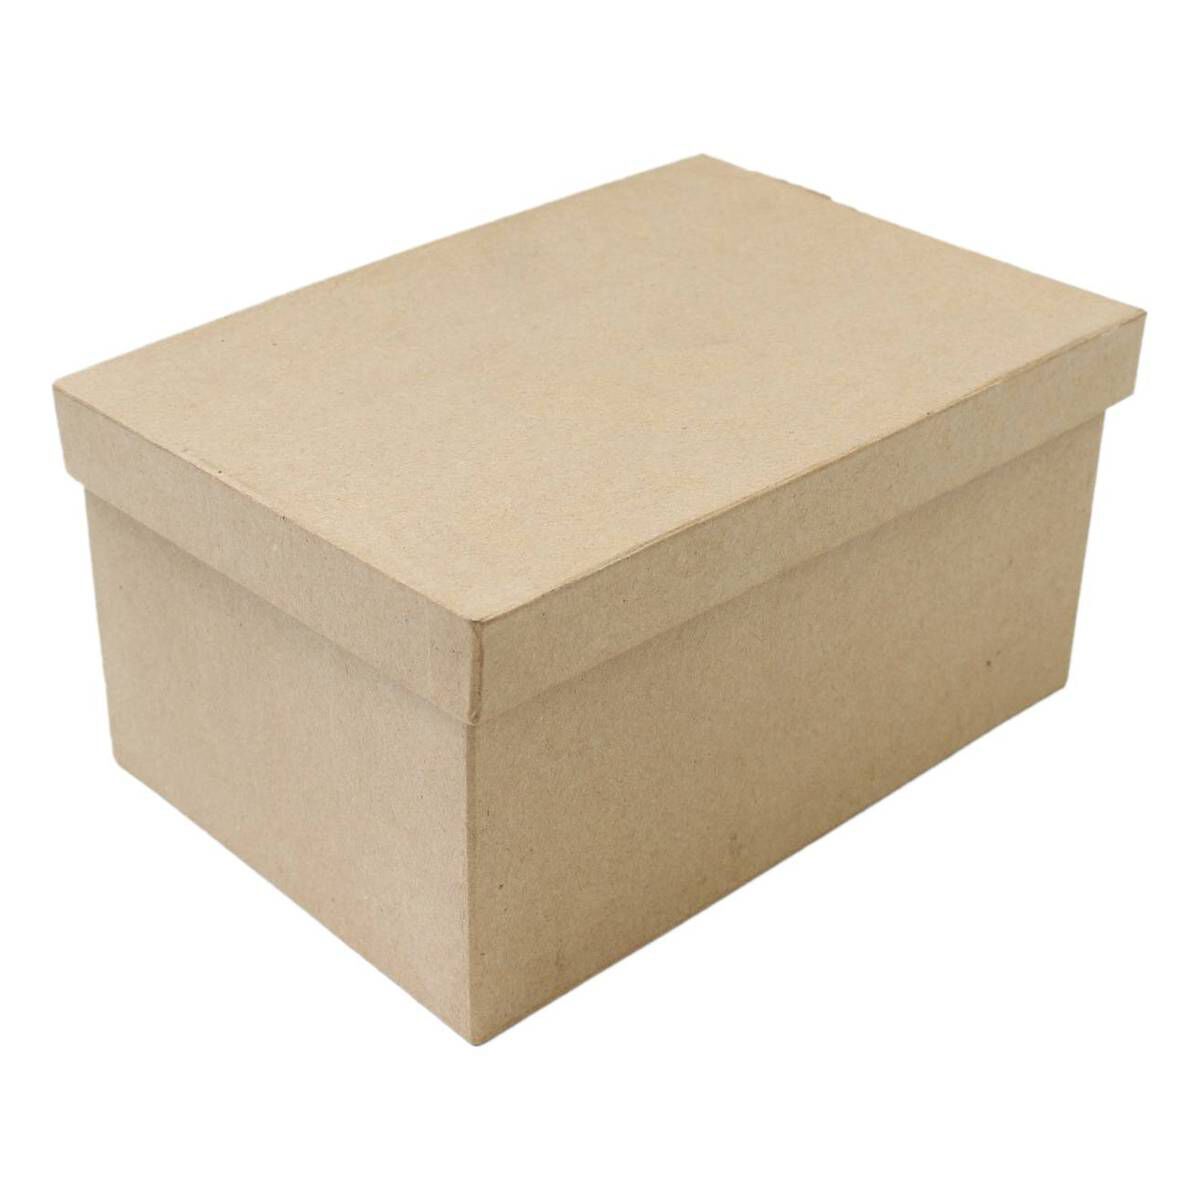 TOYS. BROWN BOX 25cm X 40cm X 8cm CRAFT GIFT BOX WITH THE LID RETAIL GIFTS 